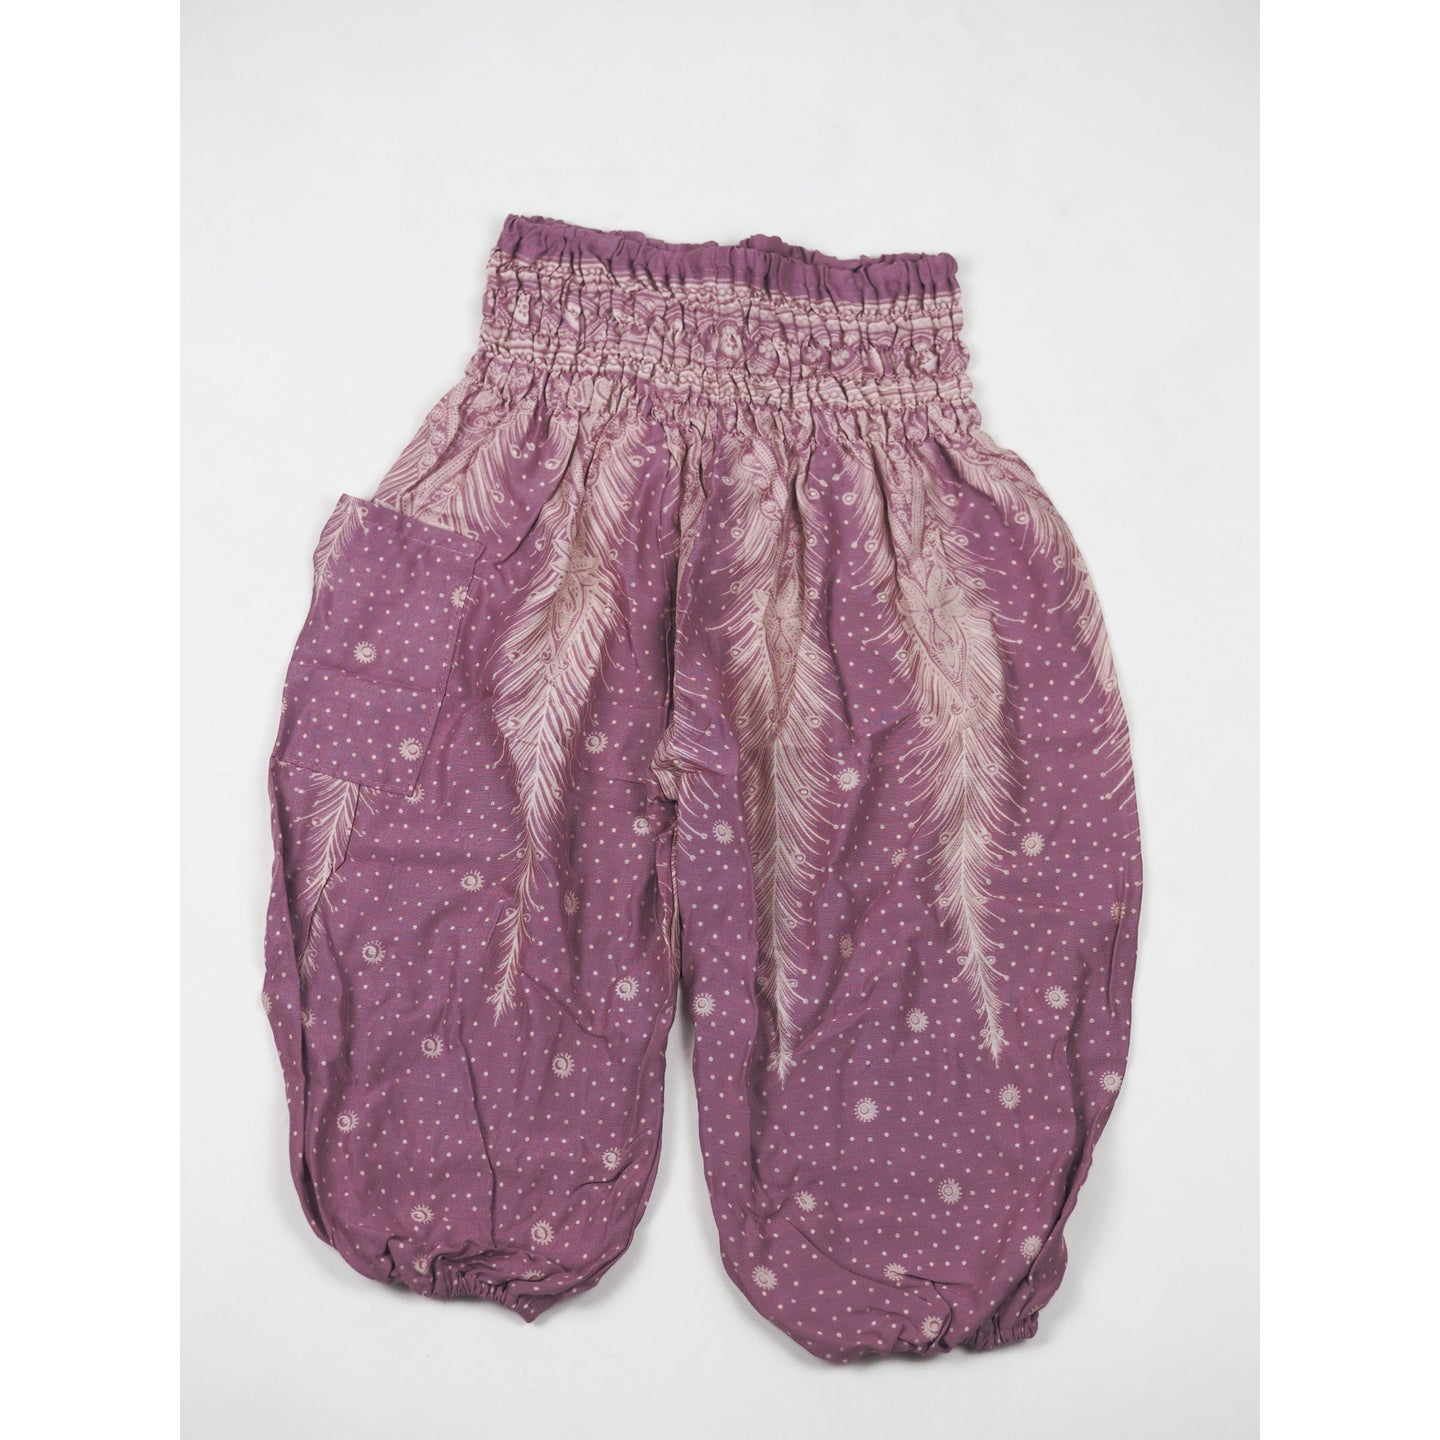 Peacock Feather Dream Unisex Kid Harem Pants in Pink PP0004 020015 05